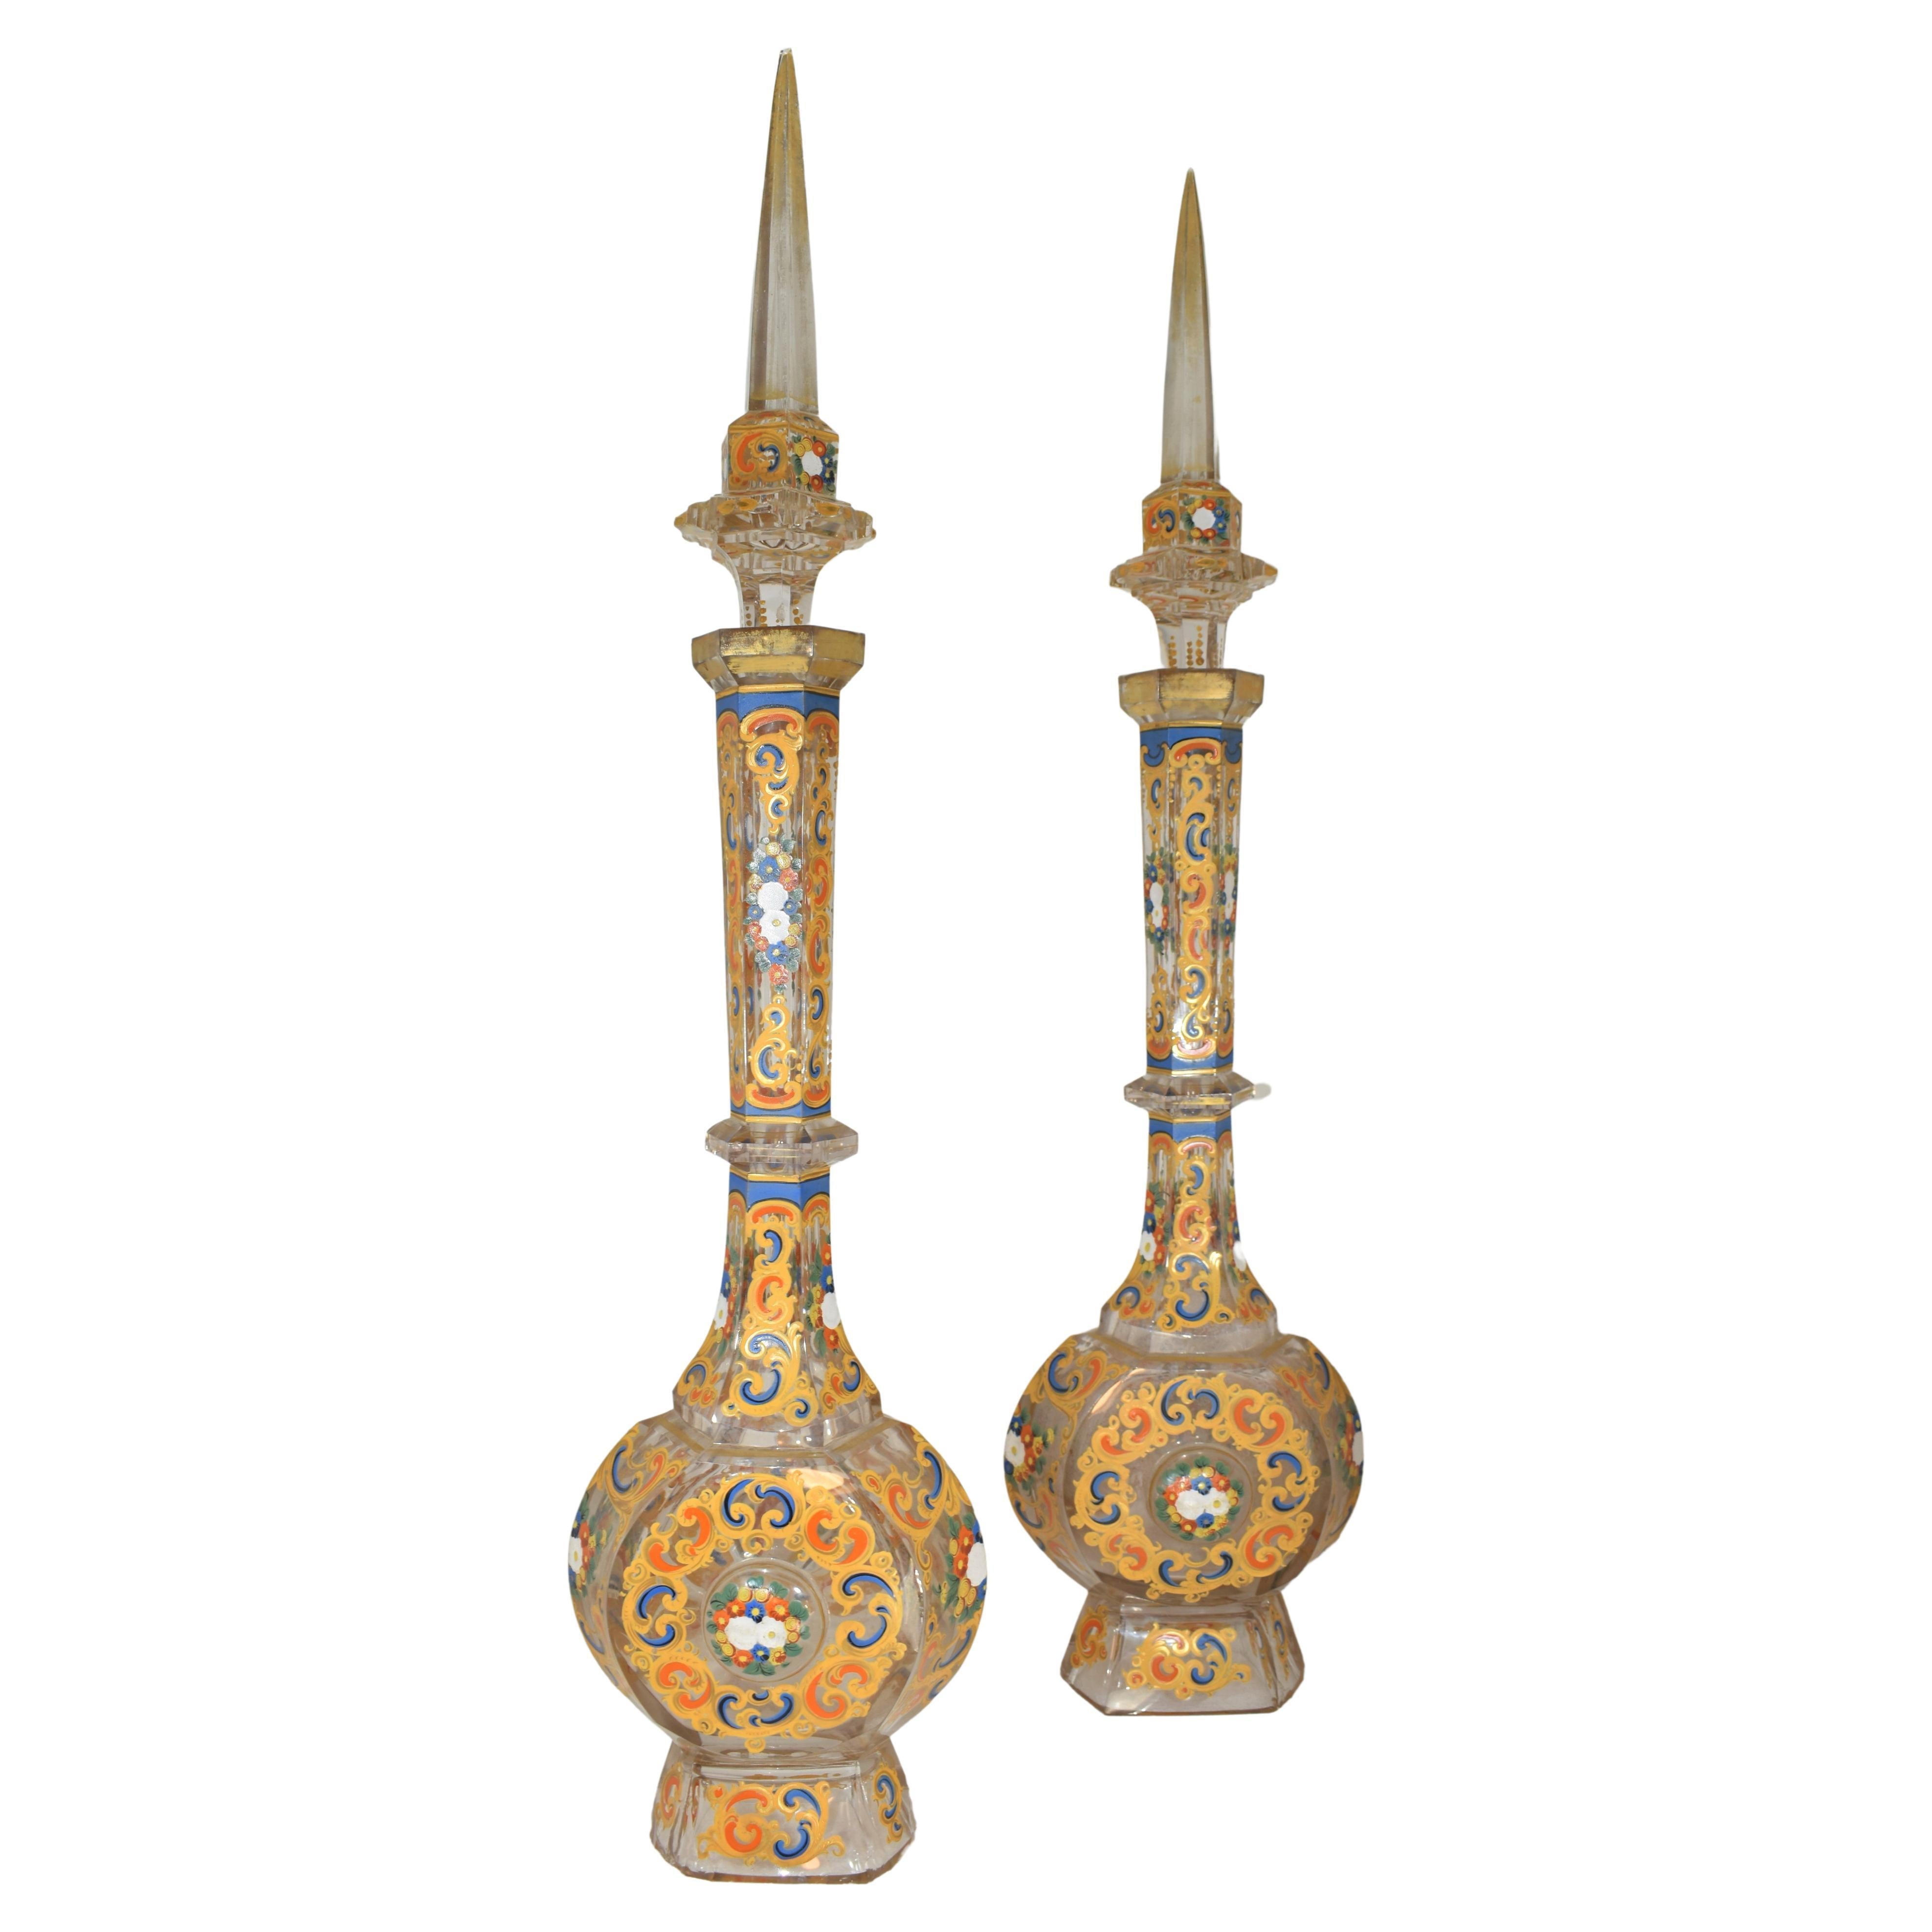 A pair of Bohemian enameled and cut clear-glass decanters and stoppers
Late 19th century
With flattened circular body and faceted knopped neck, the stopper with spire finial, enamelled with bouquets and scrolls, chips on base rims and on one